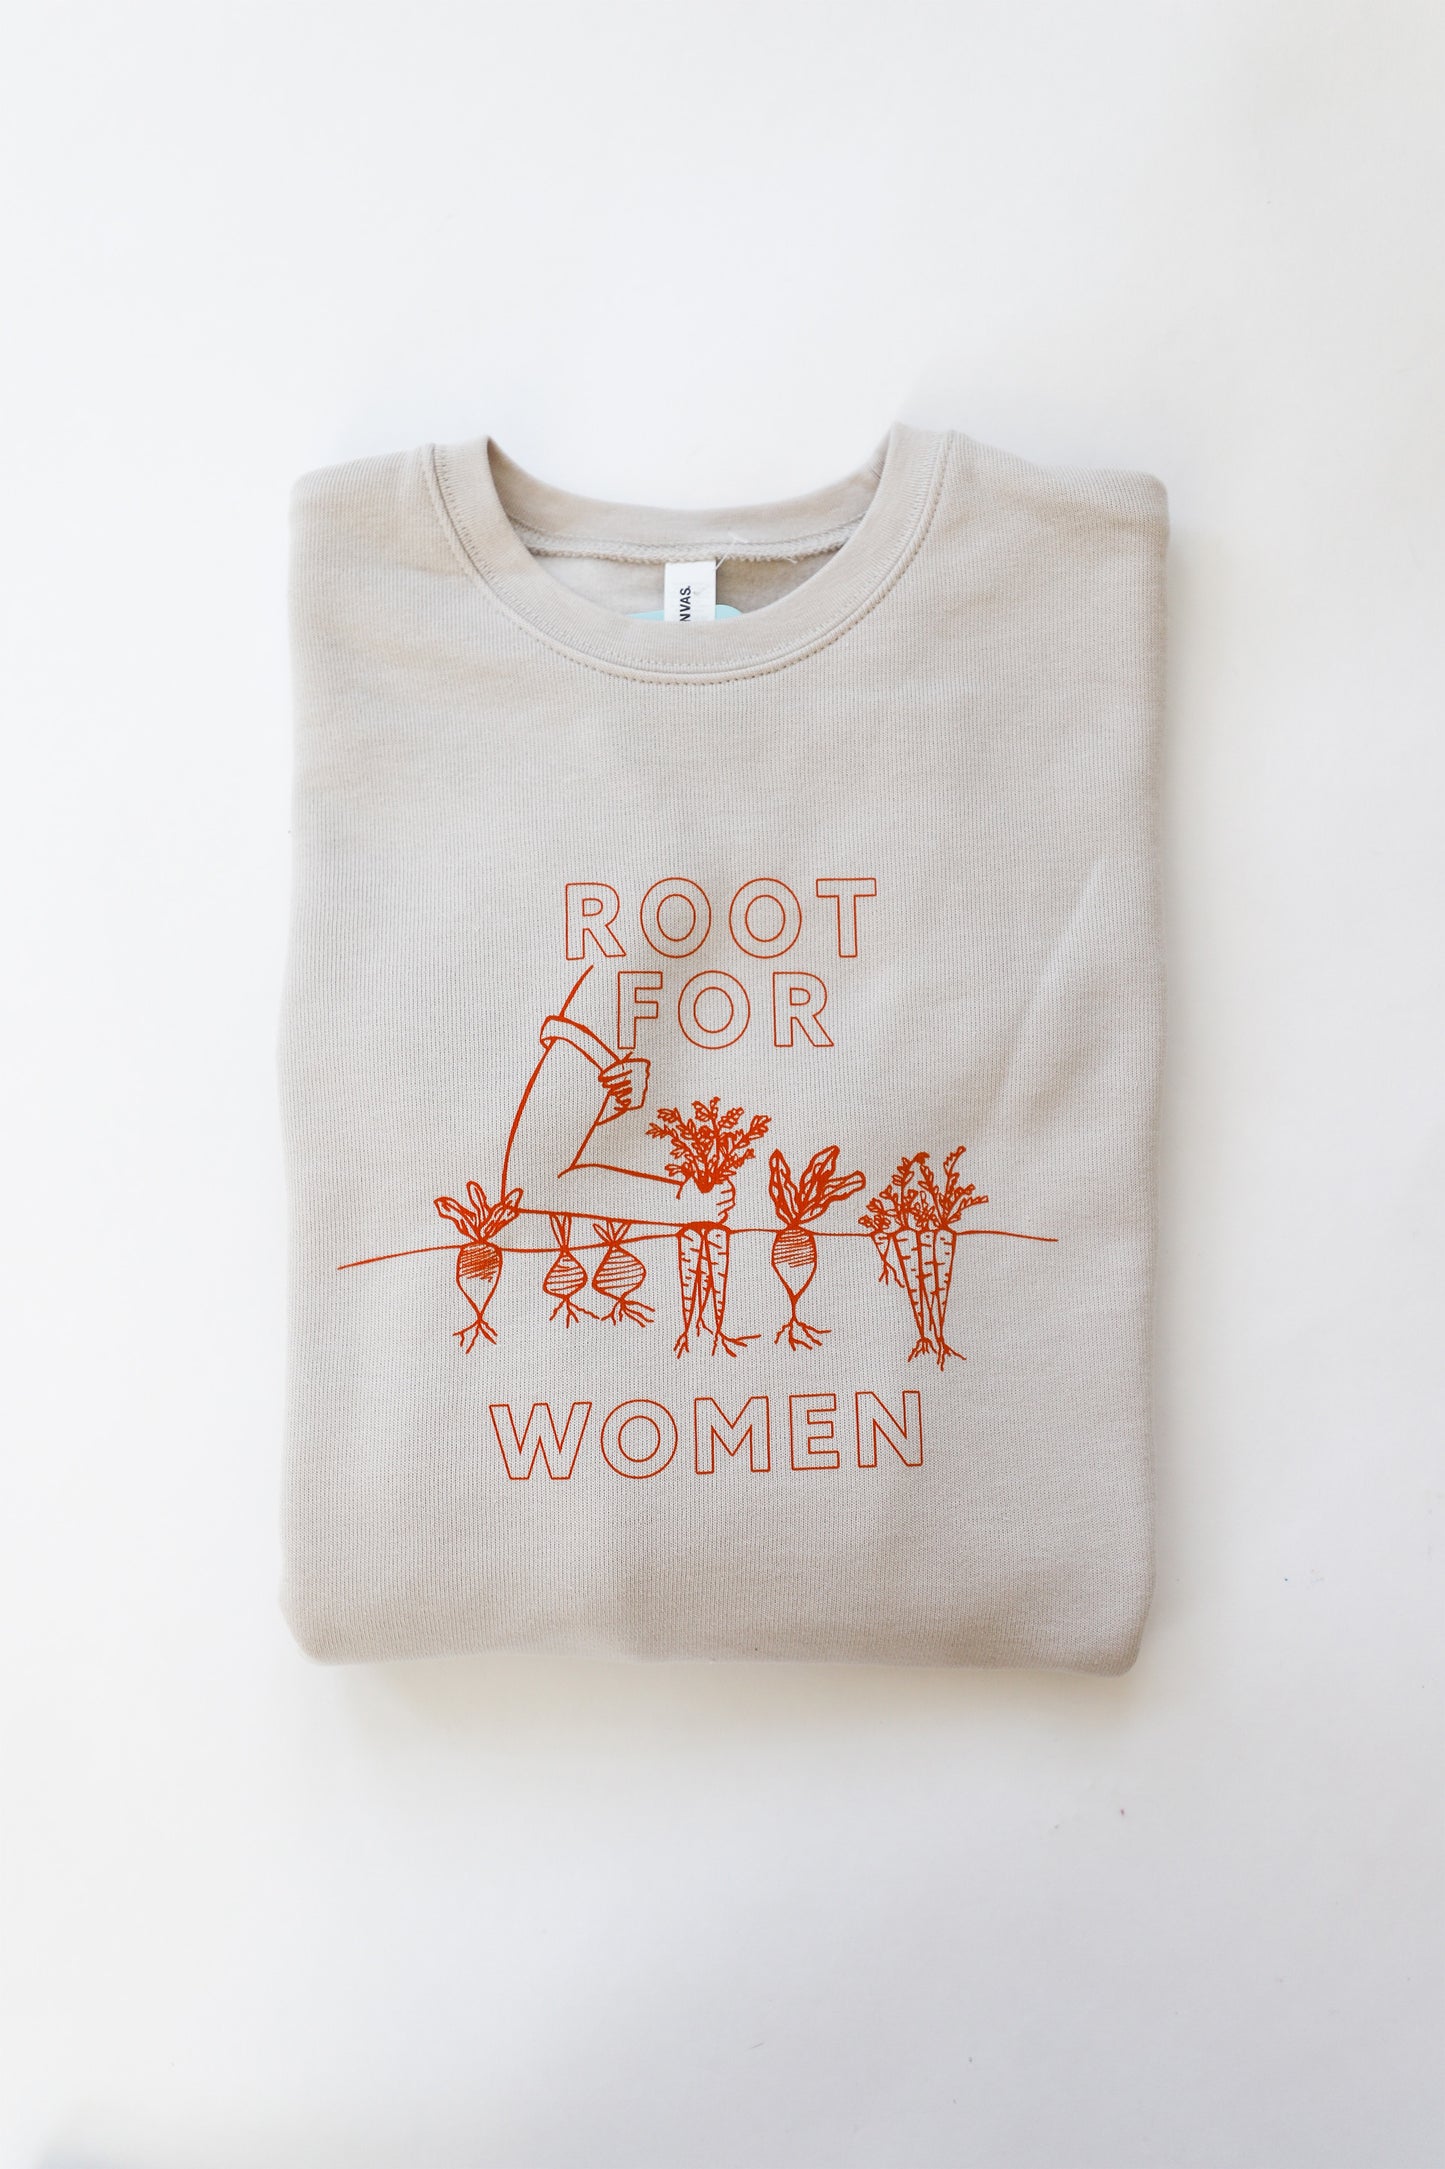 A folded natural color crewneck sweatshirt reads "Root For Women" in orange block letters